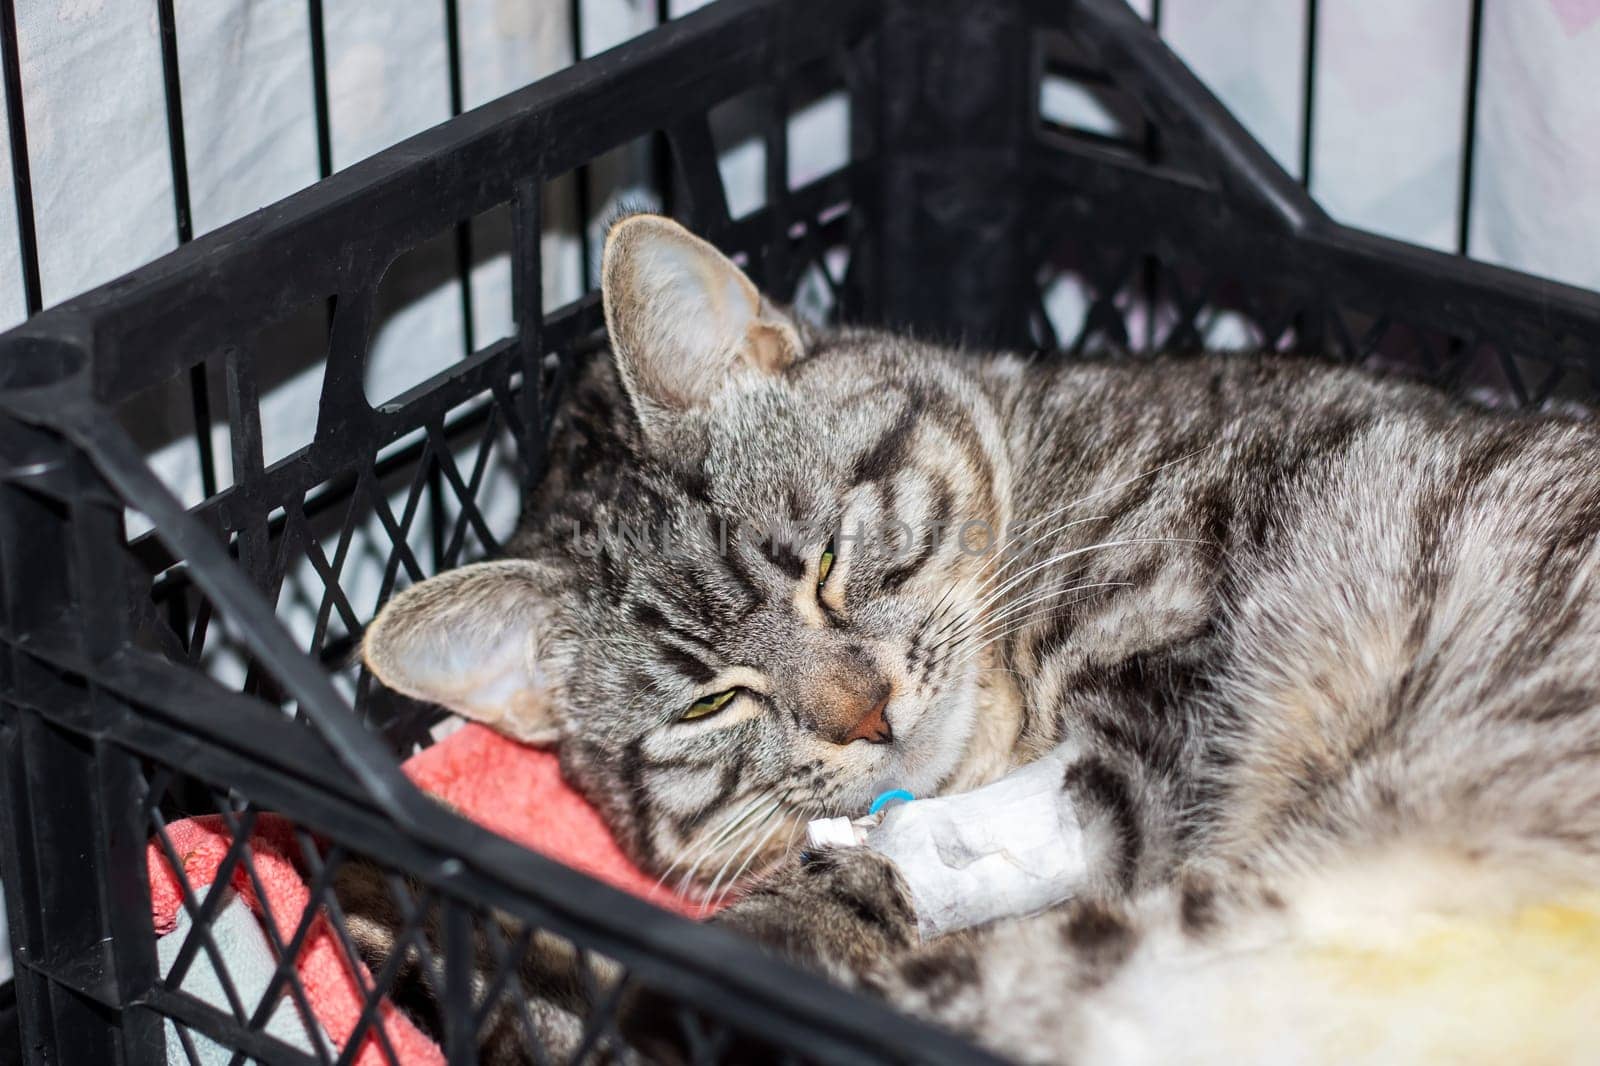 A Felidae, small to mediumsized carnivore cat with whiskers and fur is peacefully sleeping in a crate with an IV in its mouth